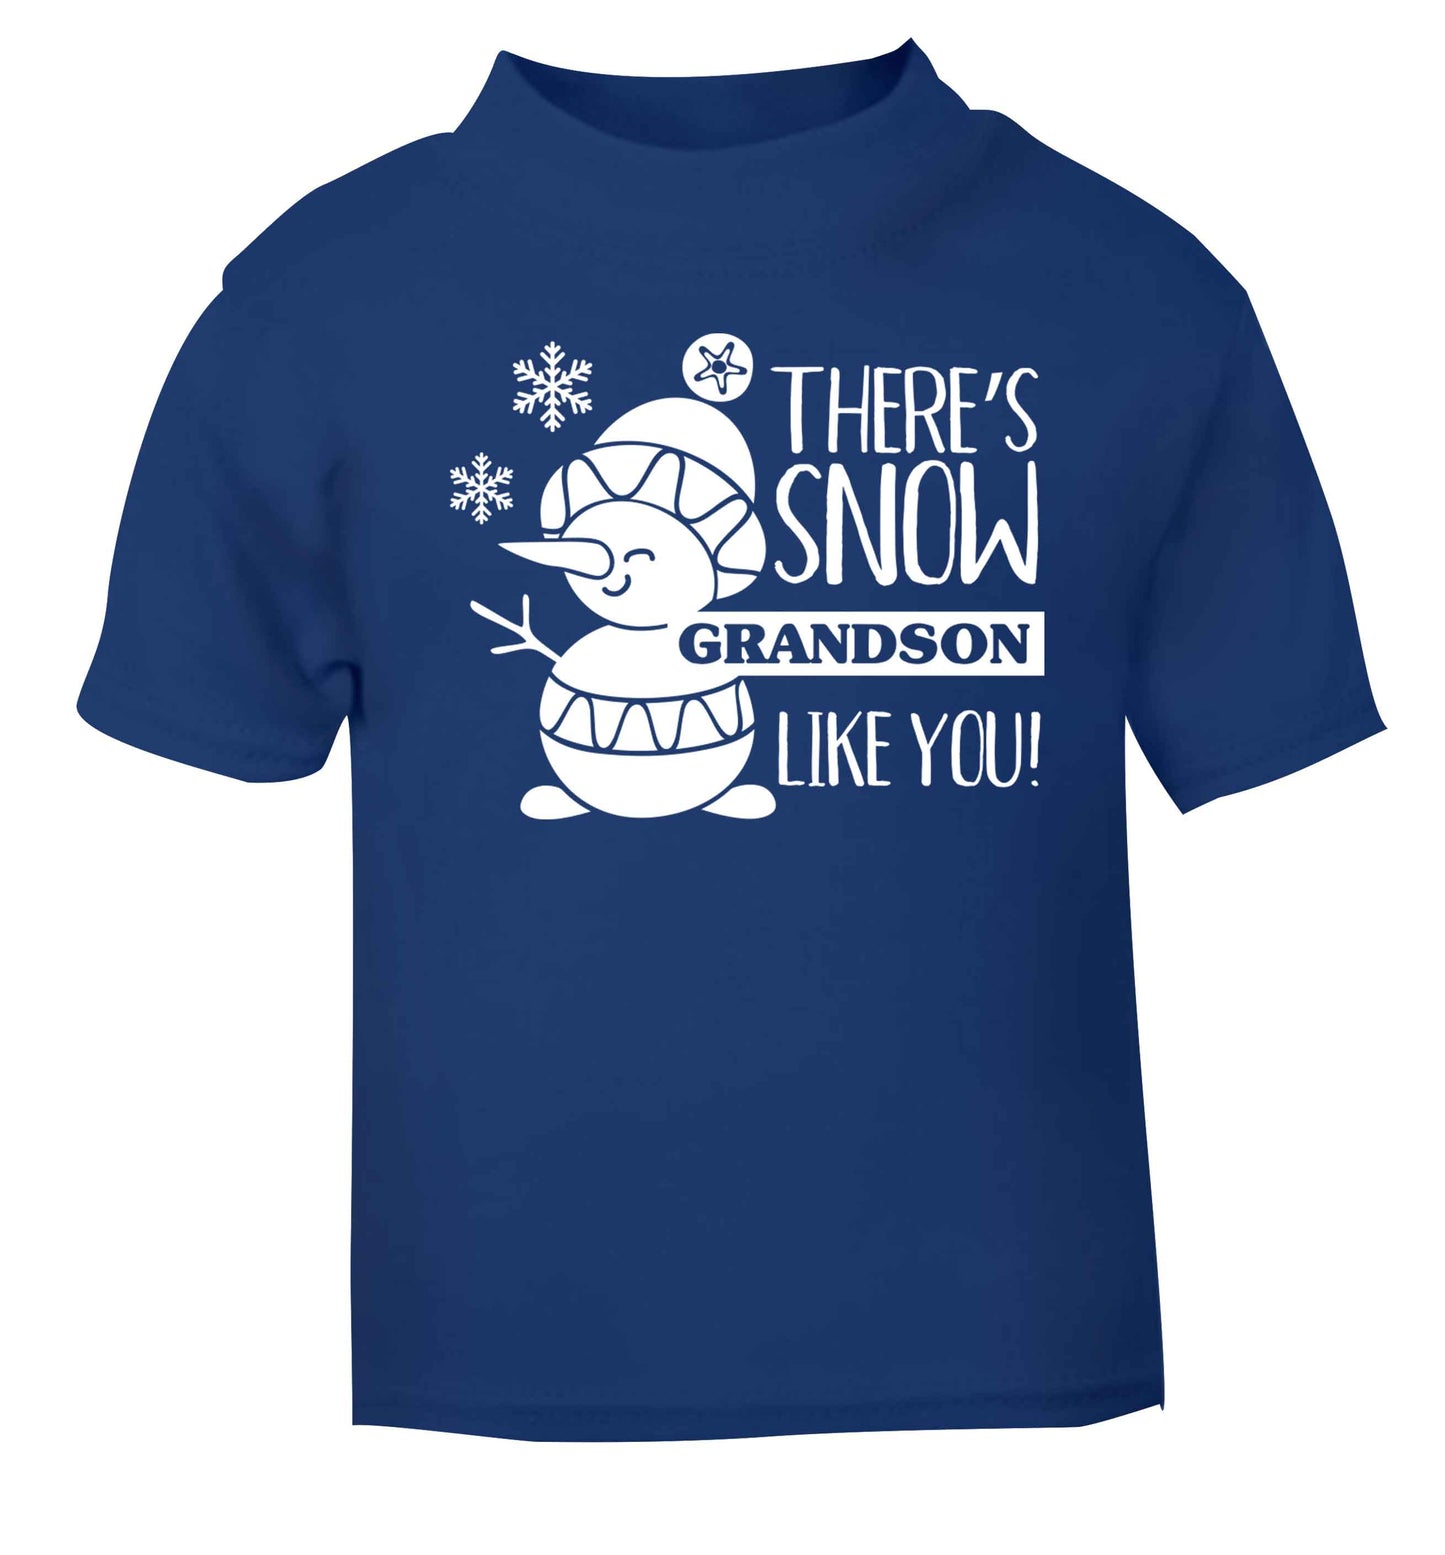 There's snow grandson like you blue baby toddler Tshirt 2 Years